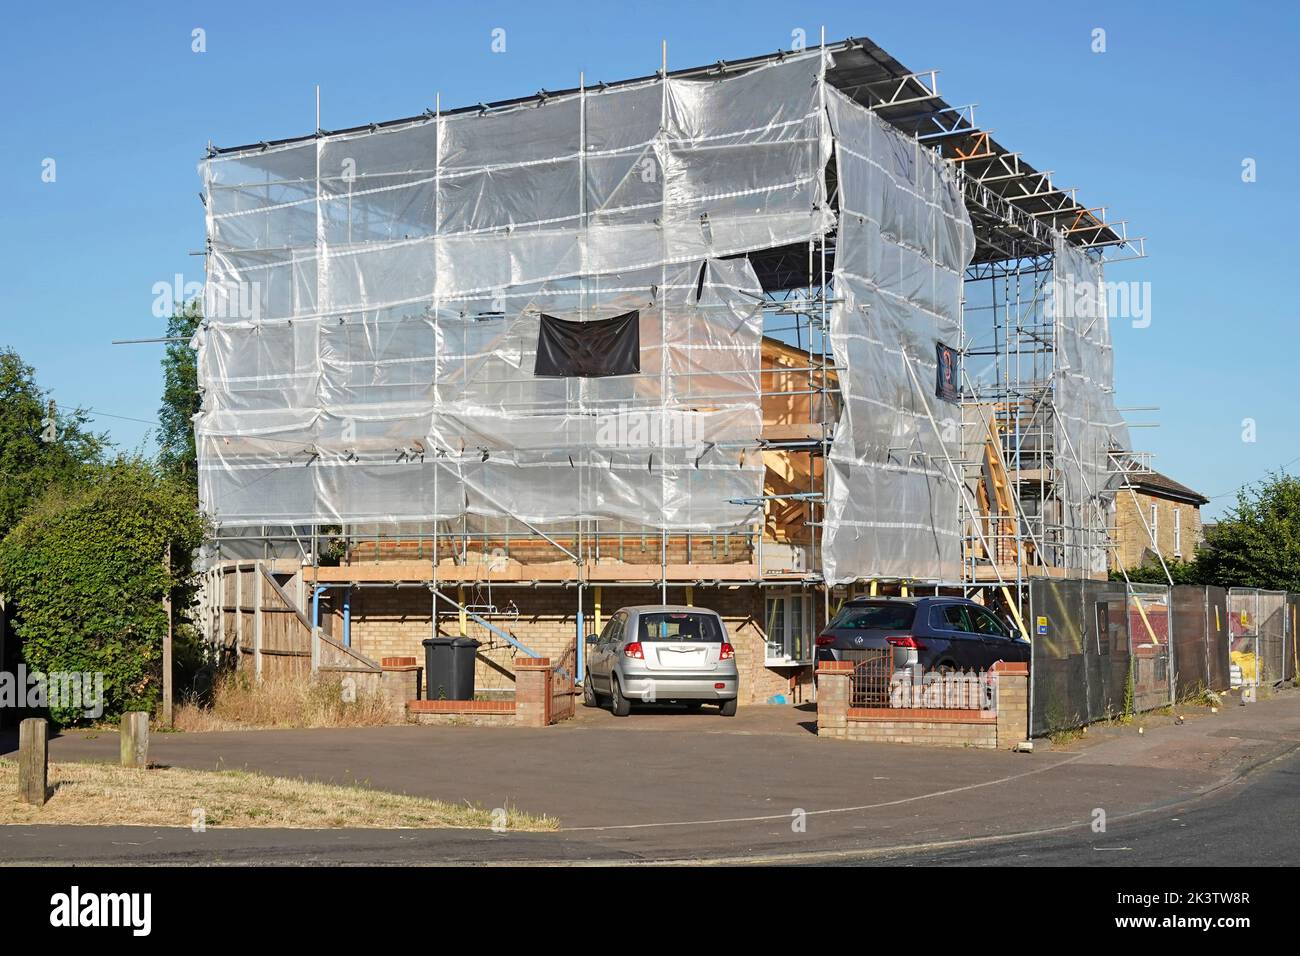 Building construction corner site bungalow conversion to house enclosed in translucent plastic cocoon & corrugated roof on scaffolding framework UK Stock Photo